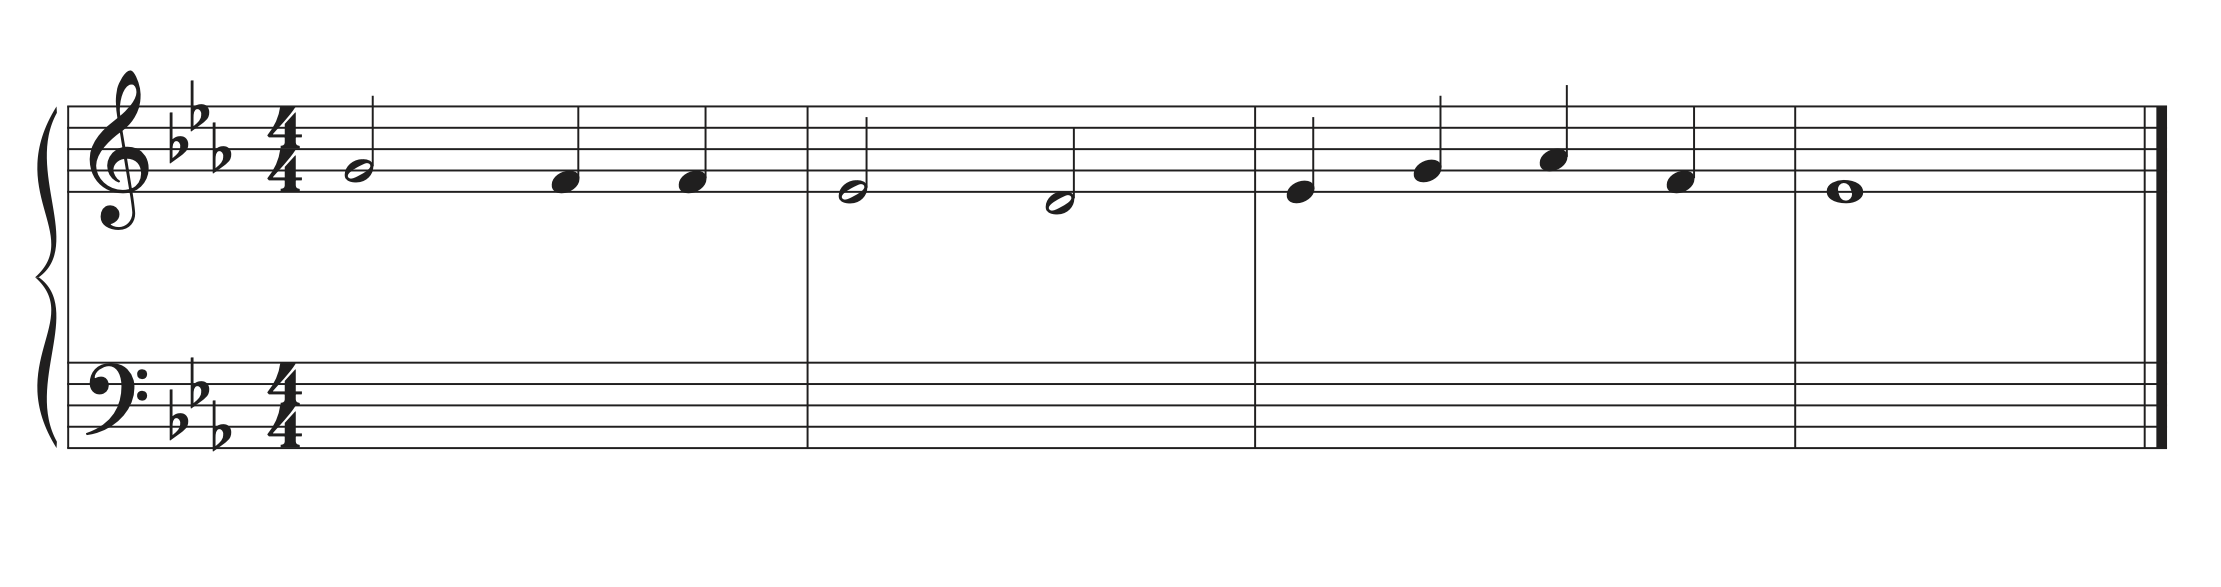 A four-bar melodic example in E-flat major with notes G4, F4, E-flat 4, D4, E-flat 4, G4, A-flat 4, F4 and E-flat 4.